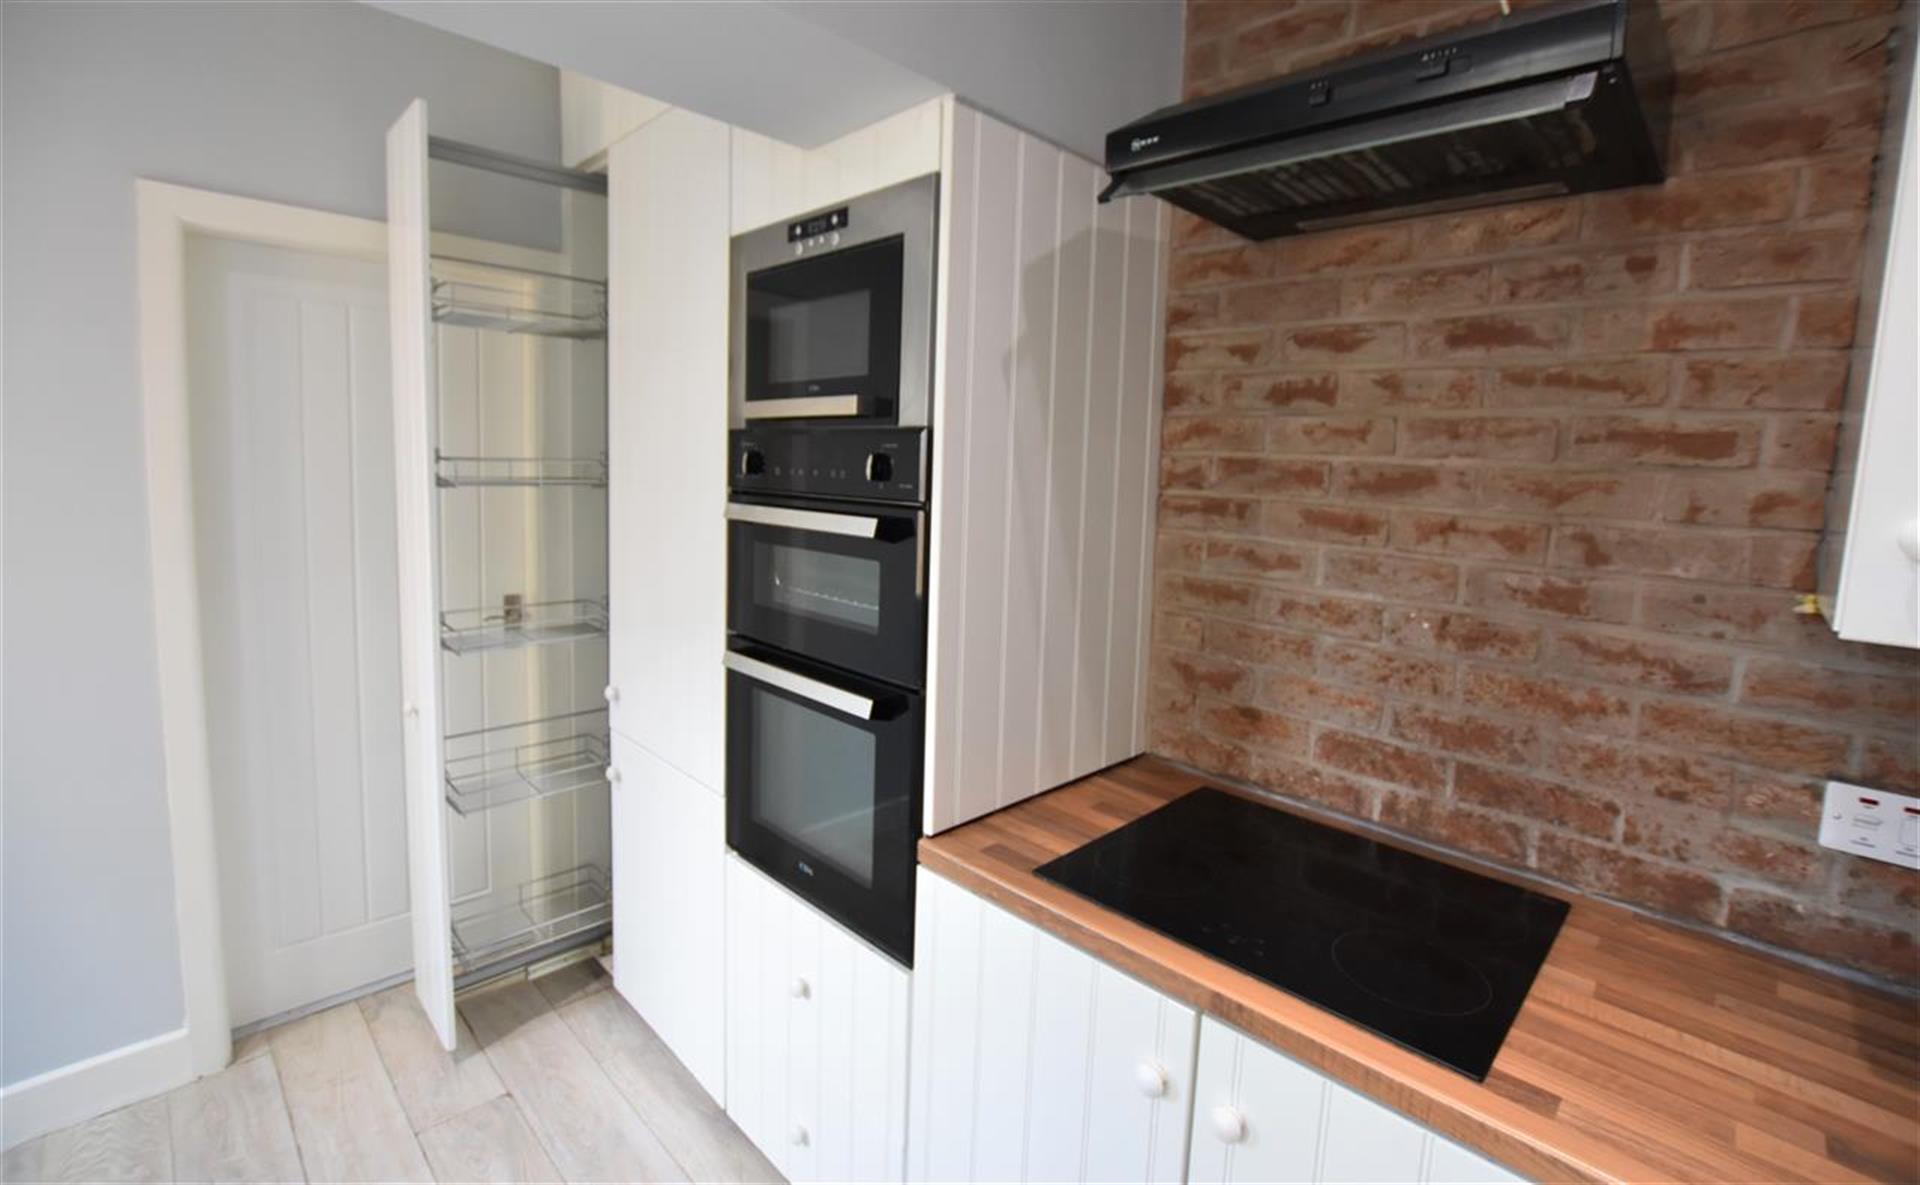 3 Bedroom End Terraced House For Sale - Kitchen